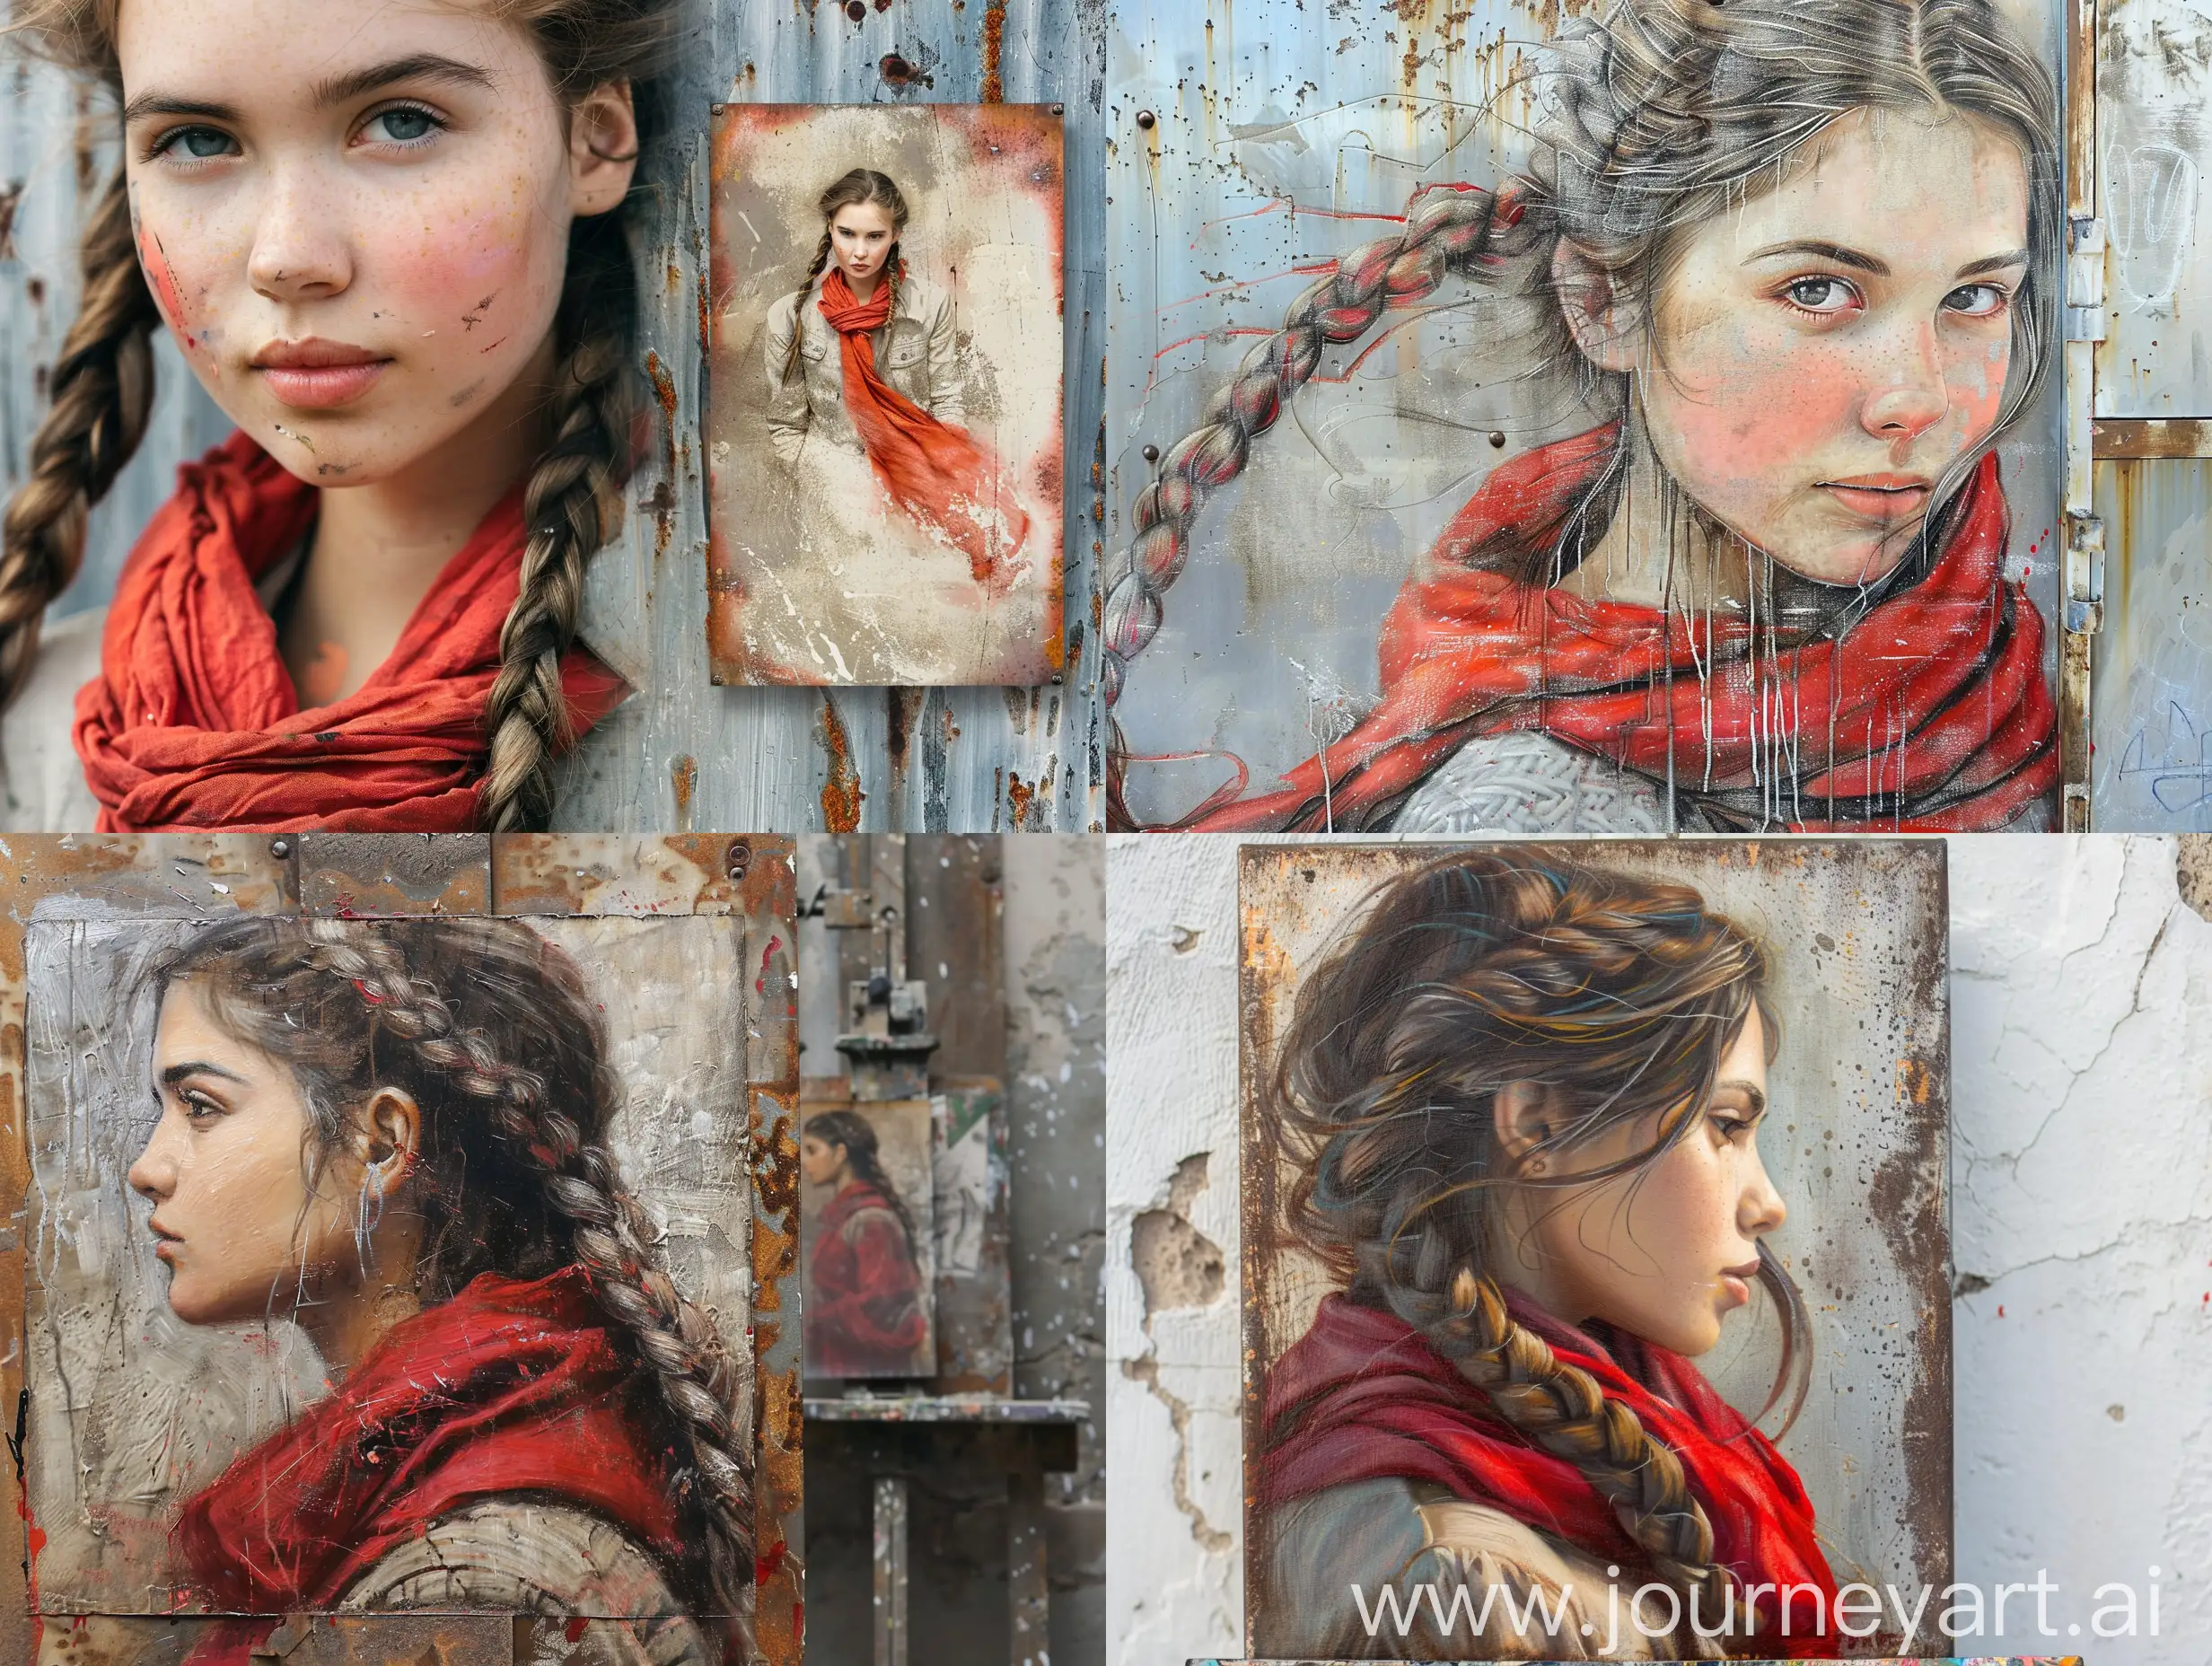 There is a picture of a girl with braided hair painting on metal and wearing a red scarf